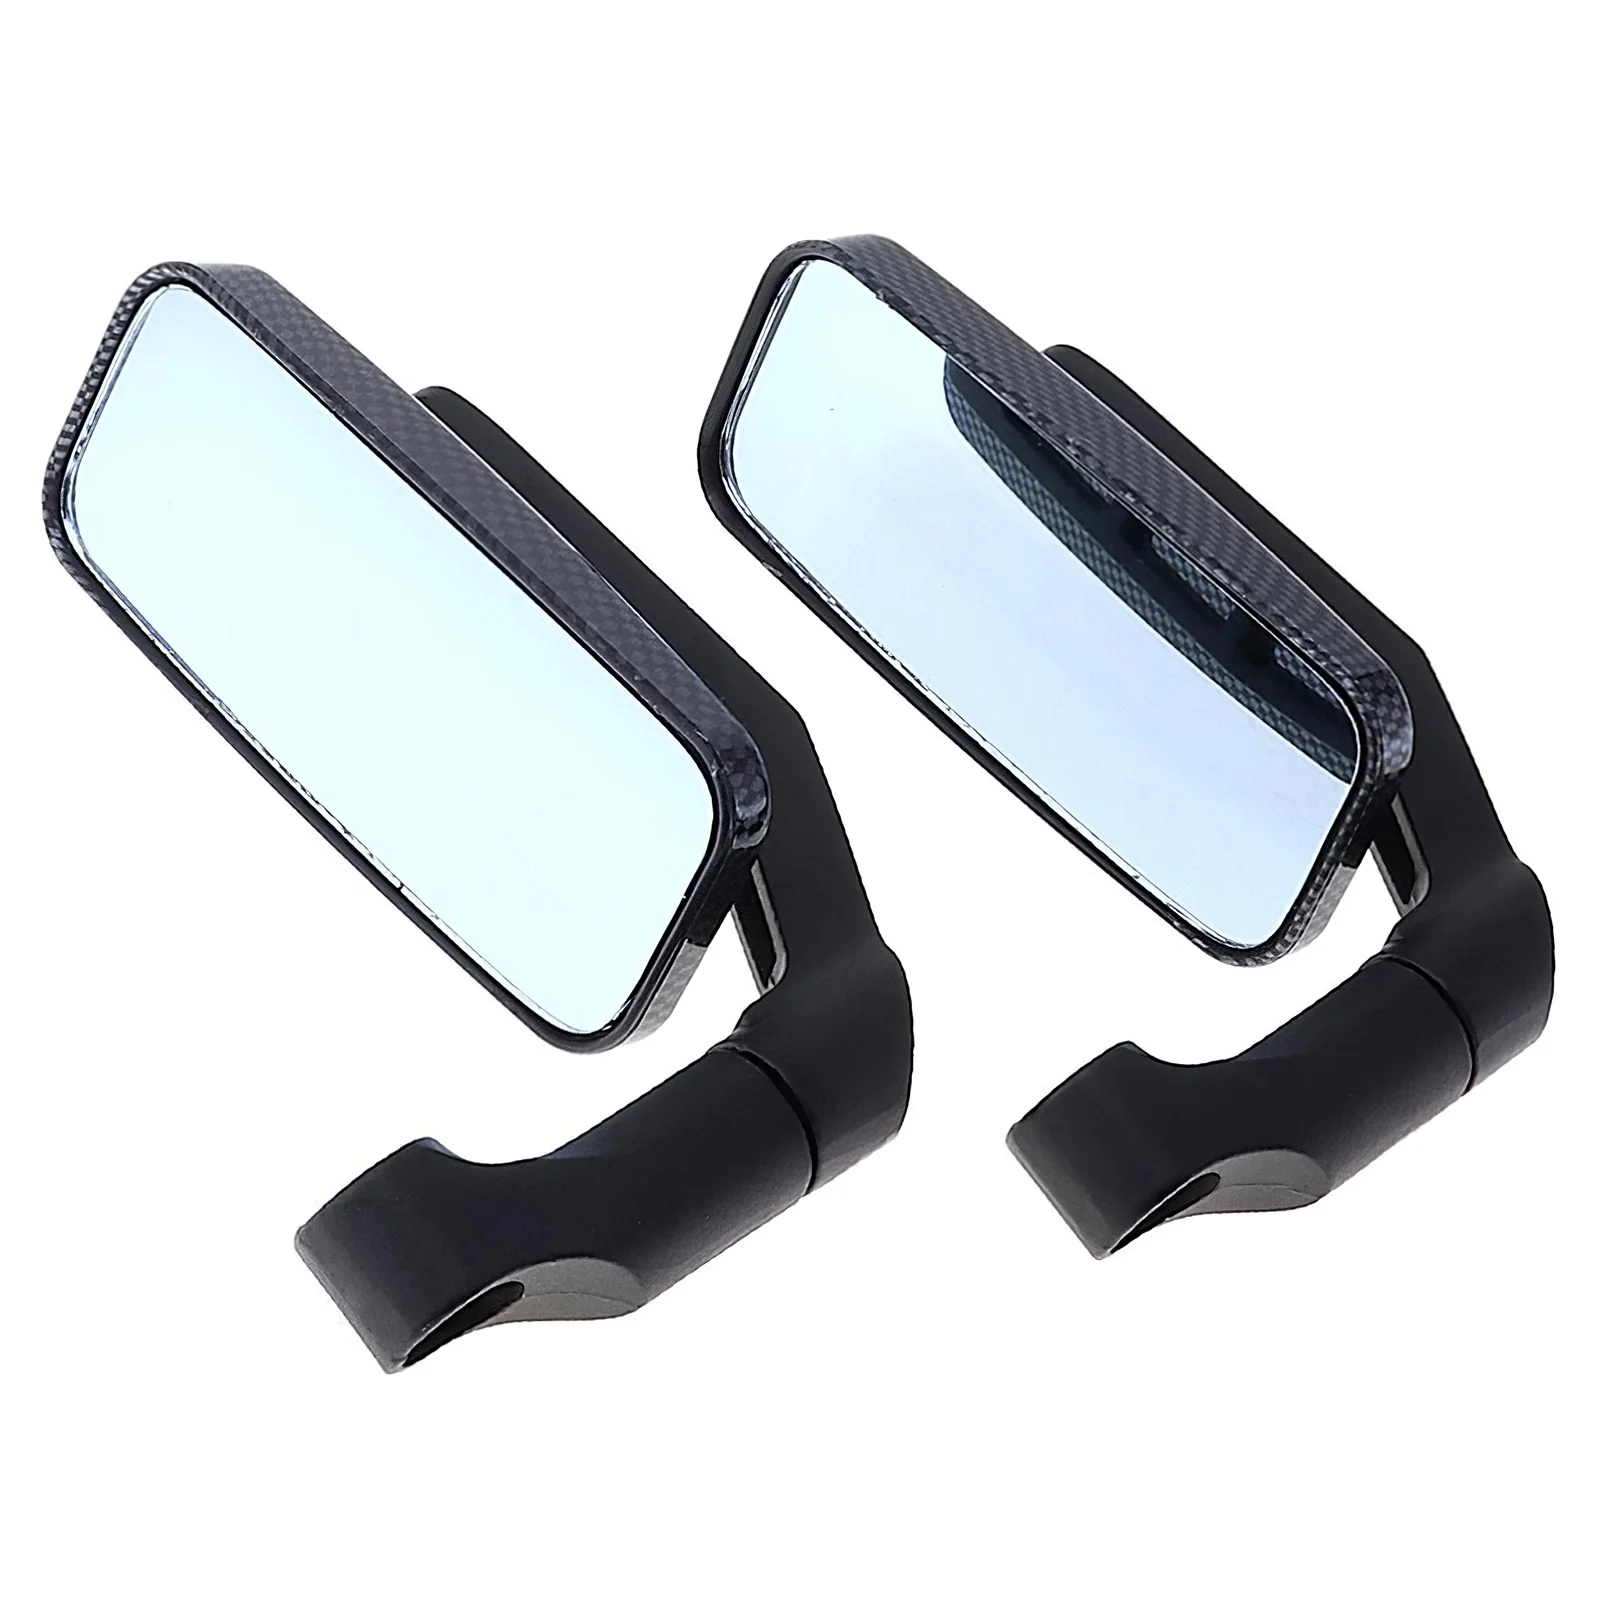 

2pcs Rearview Mirror Universal Durable Modified Motorcycle Rearview Mirror Side Mirrors 360 Degrees Rotation Clear Vision